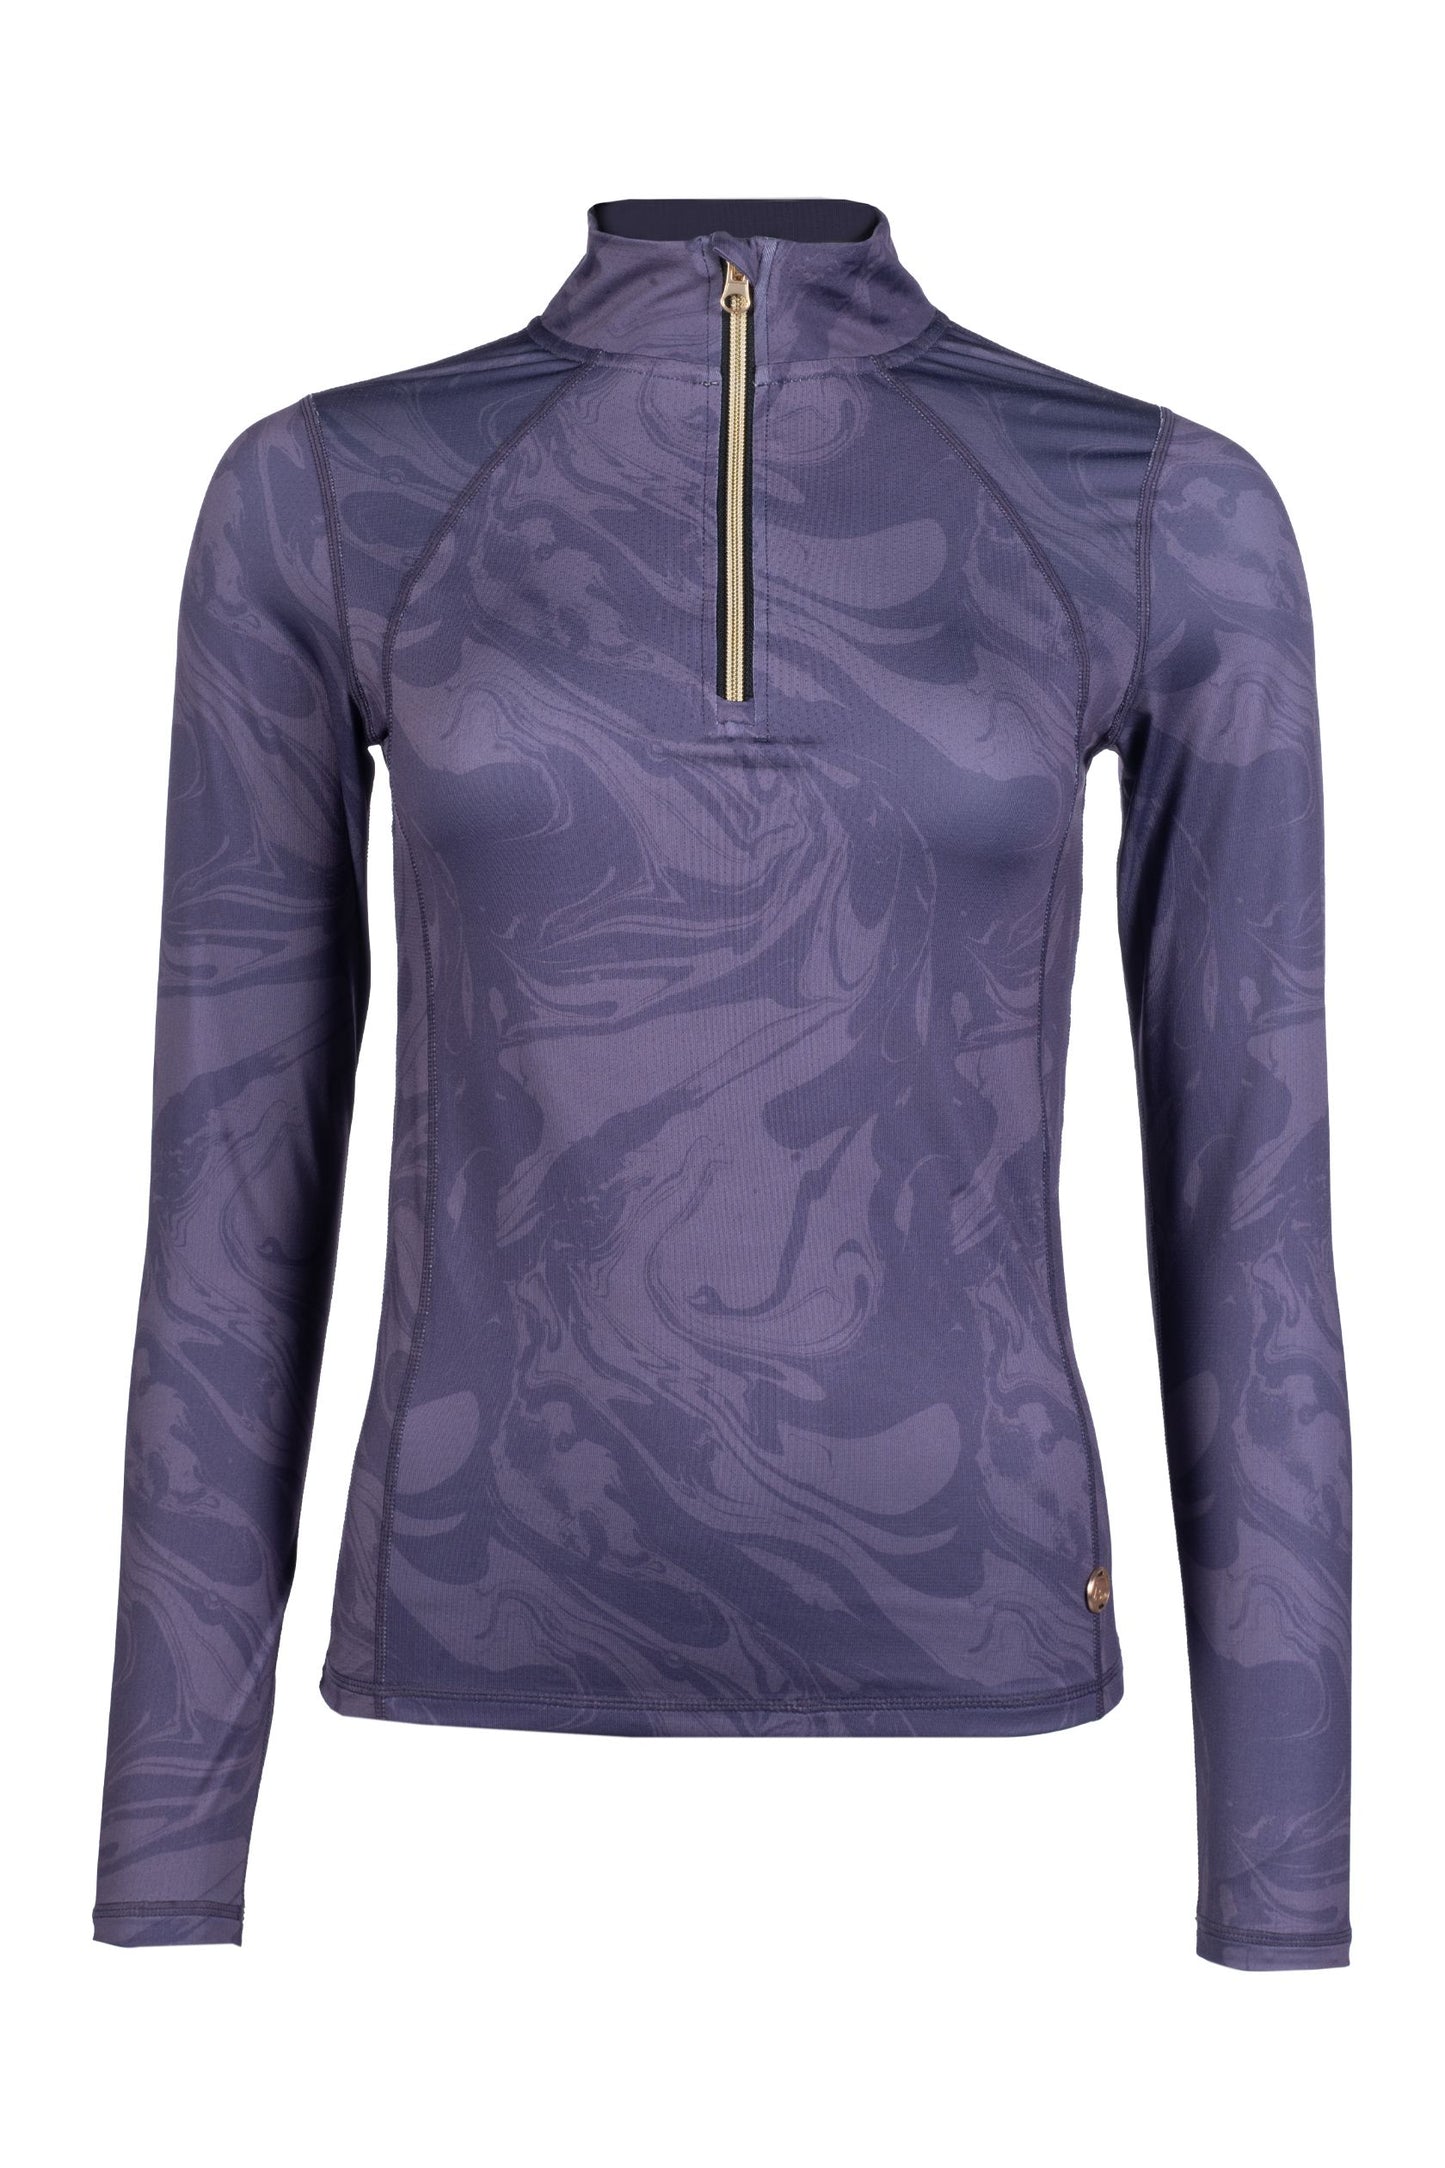 HKM Lavender Bay Collection Marble Sun Shirt